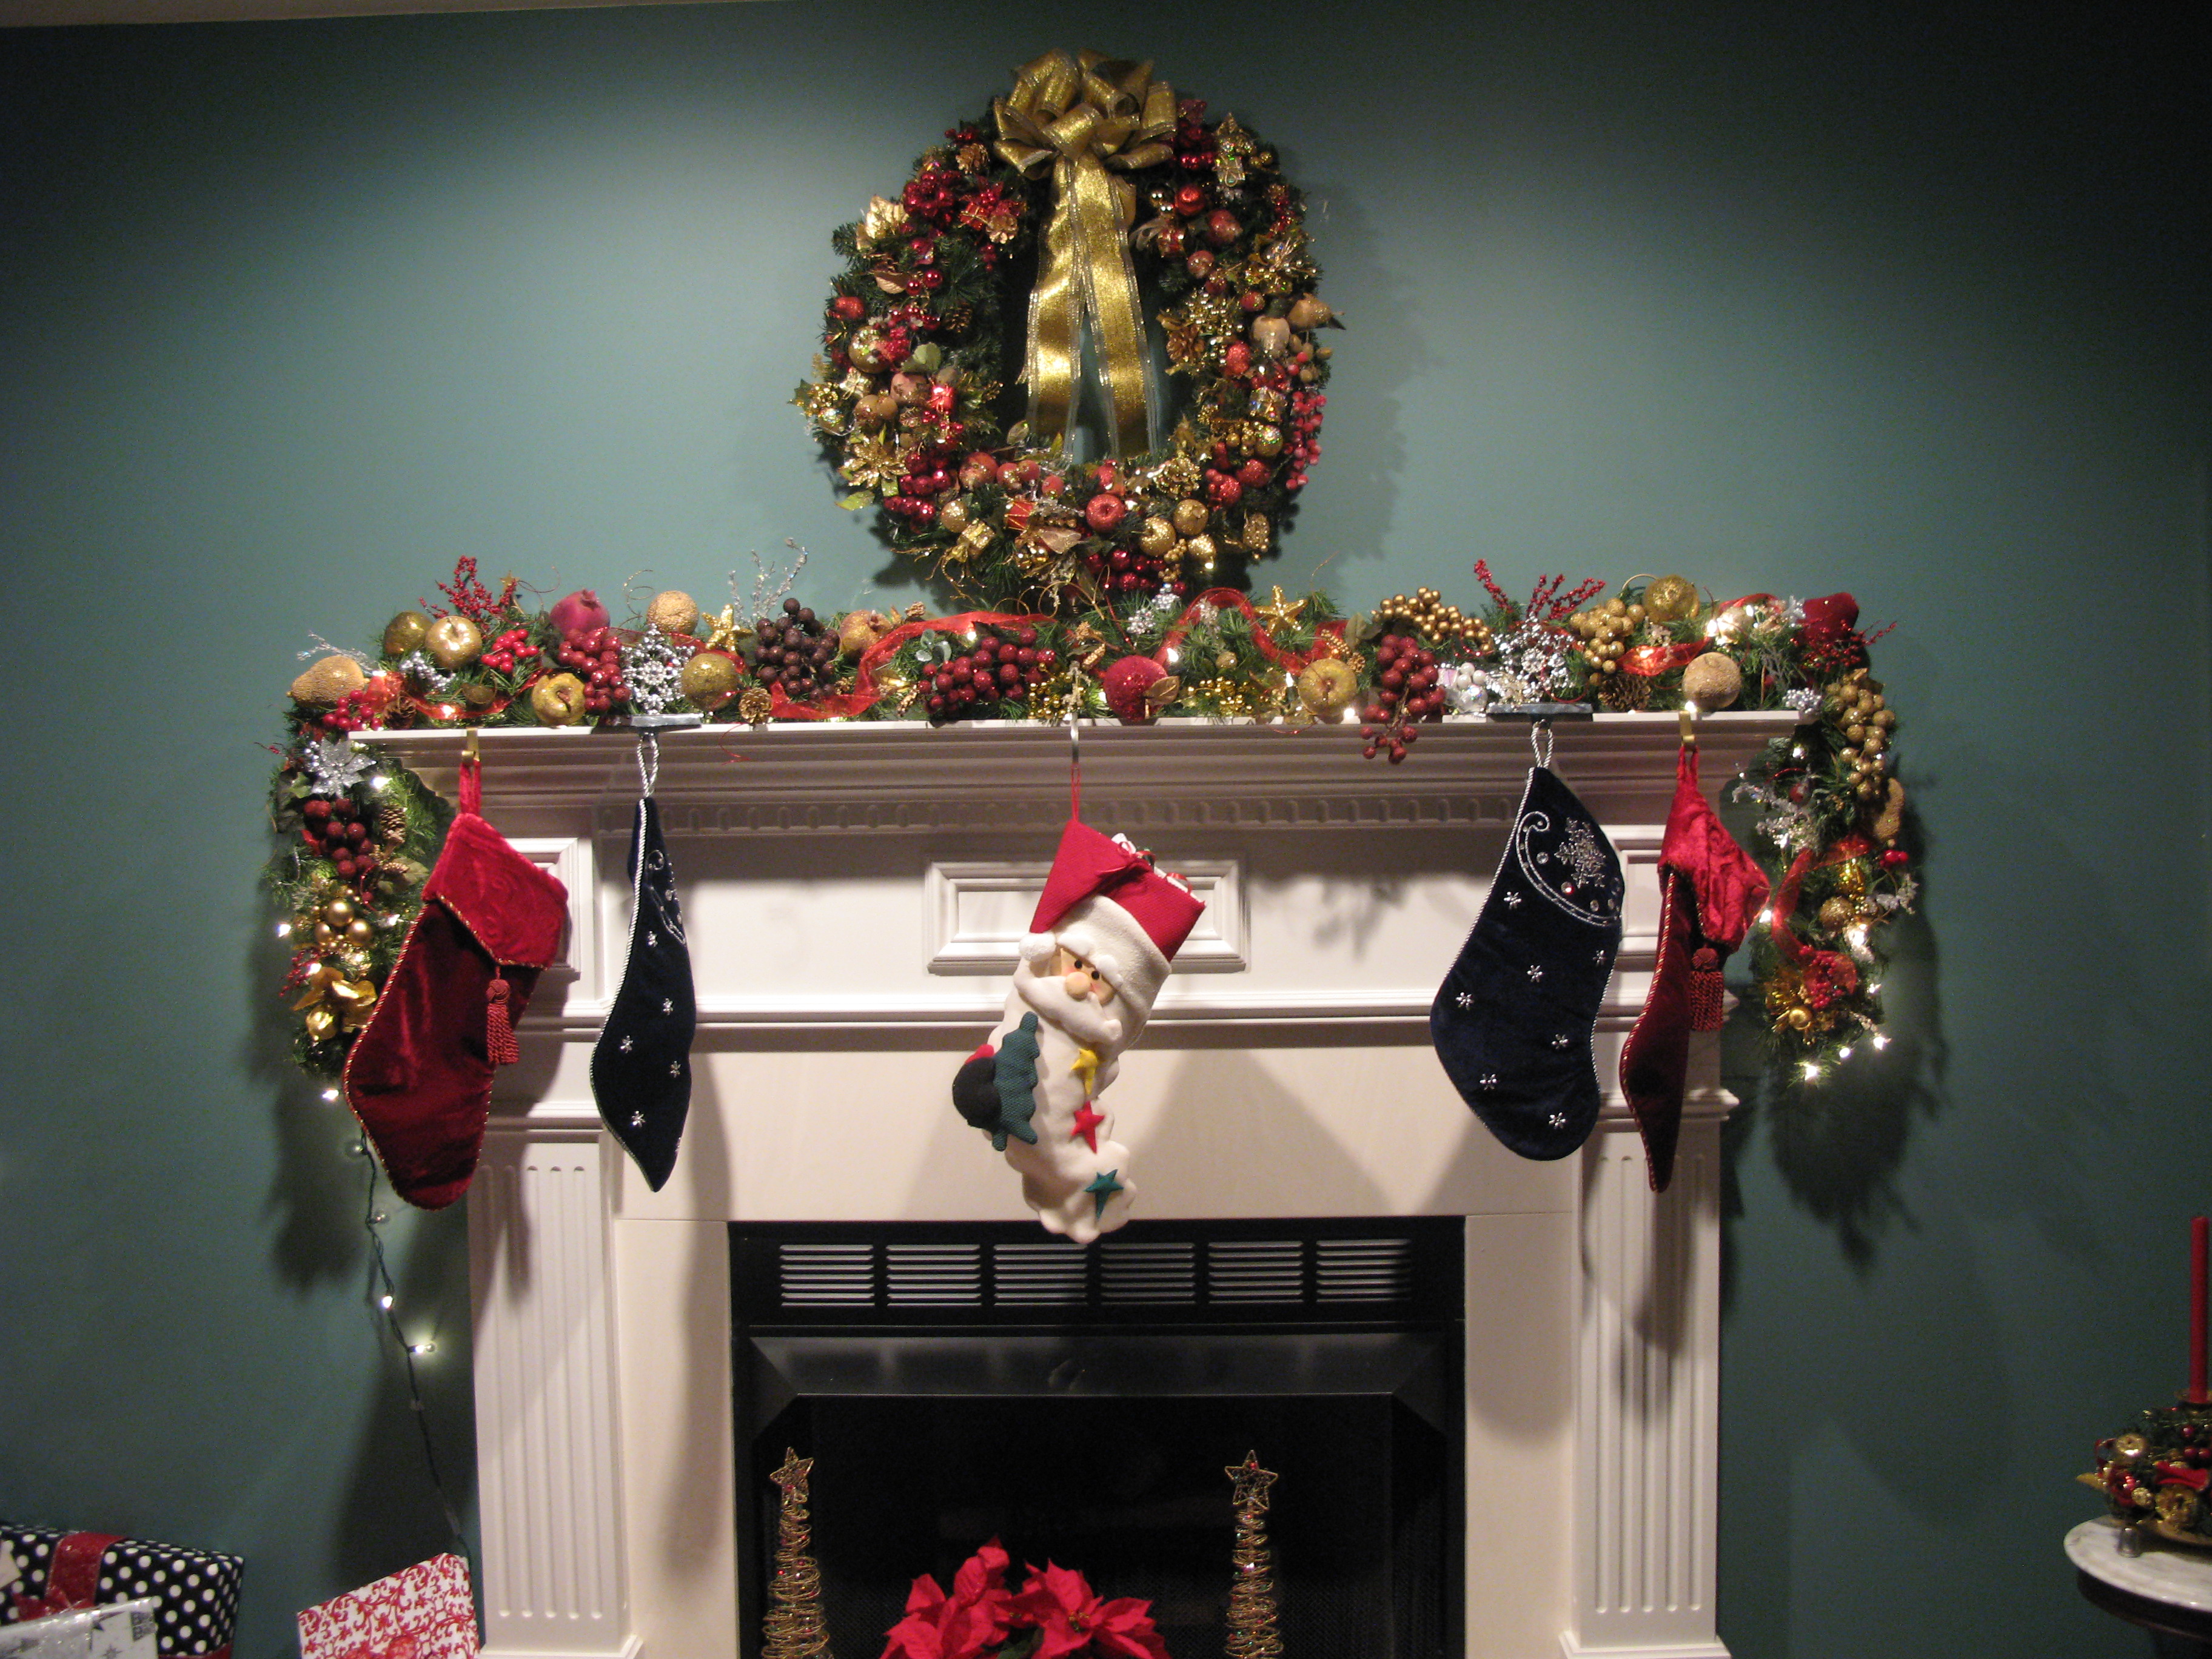 The stockings - my favorite part!